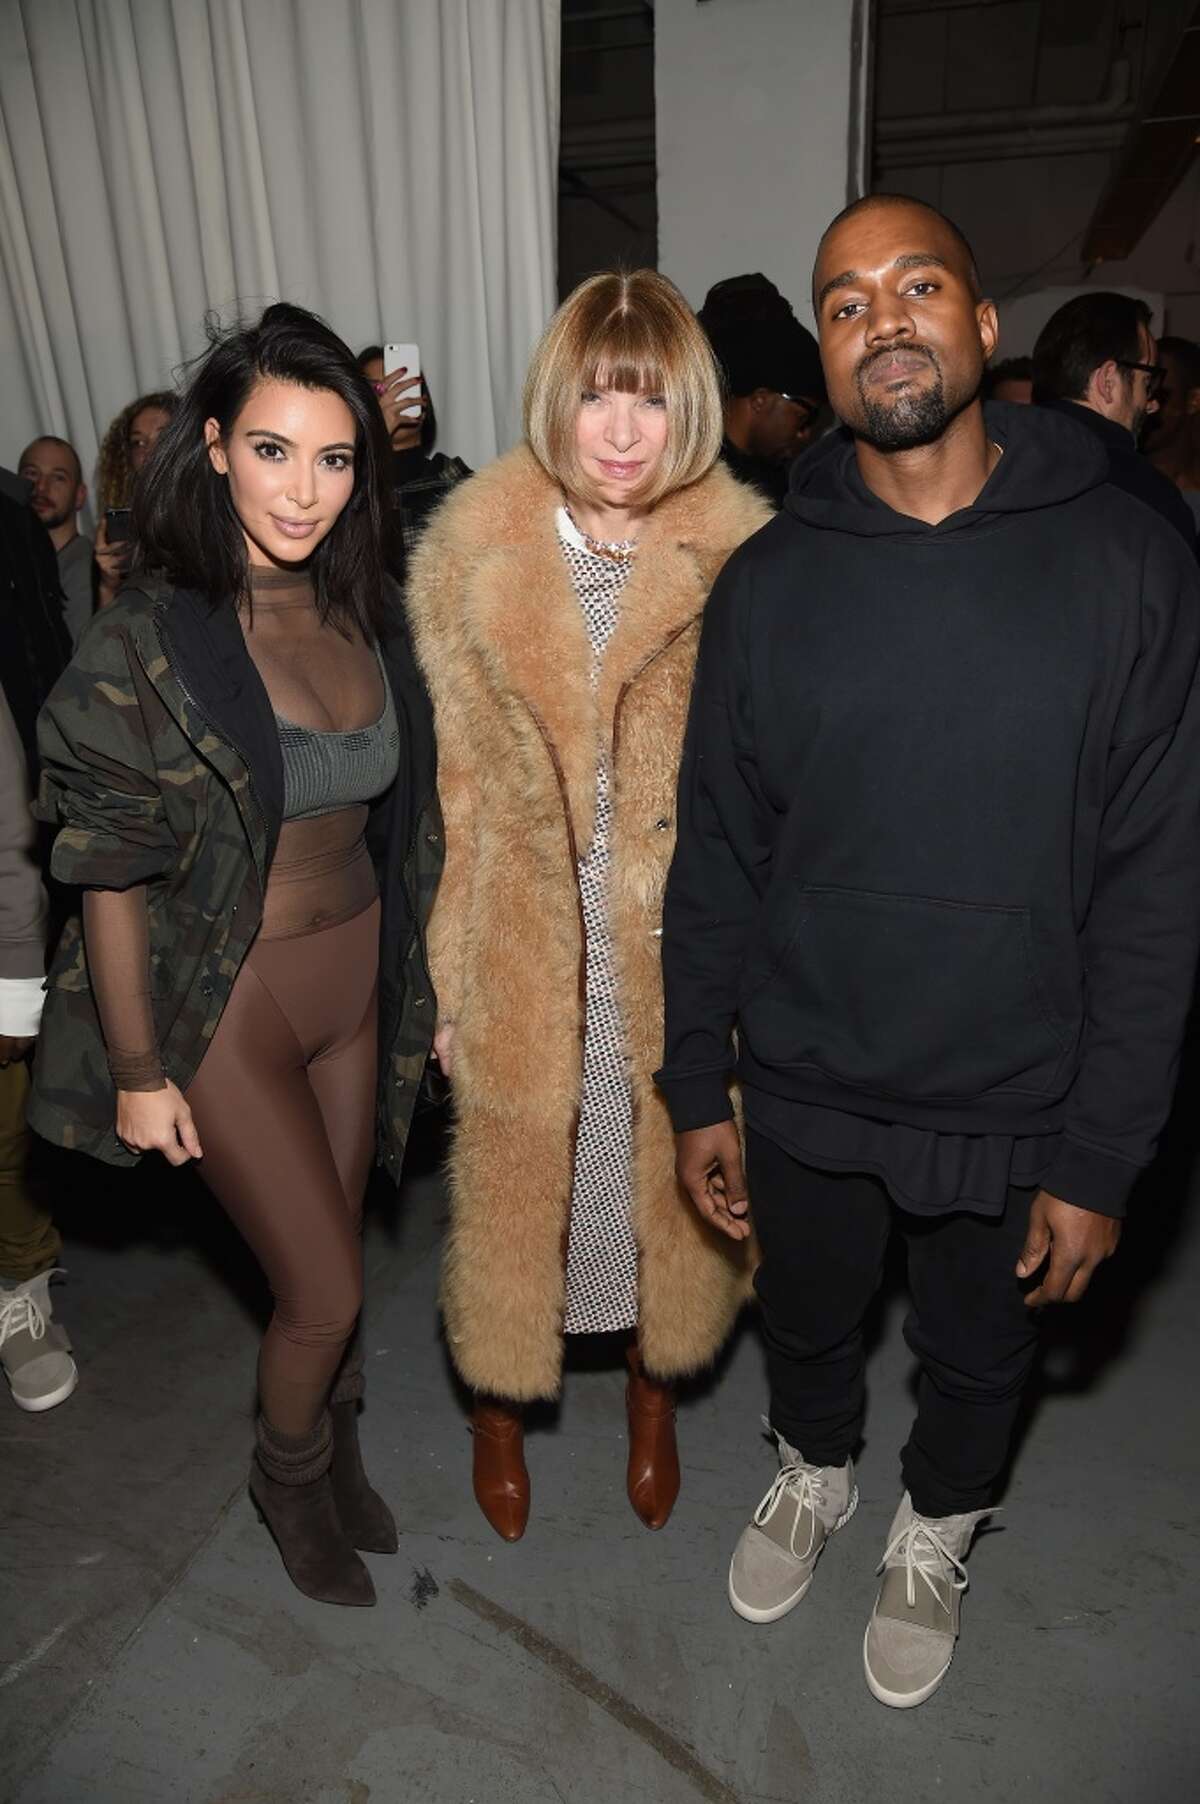 (L-R) Kim Kardashian, Anna Wintour, and Kanye West pose backstage at the adidas Originals x Kanye West YEEZY SEASON 1 fashion show during New York Fashion Week Fall 2015 at Skylight Clarkson Sq on February 12, 2015 in New York City. (Photo by Dimitrios Kambouris/Getty Images for adidas)